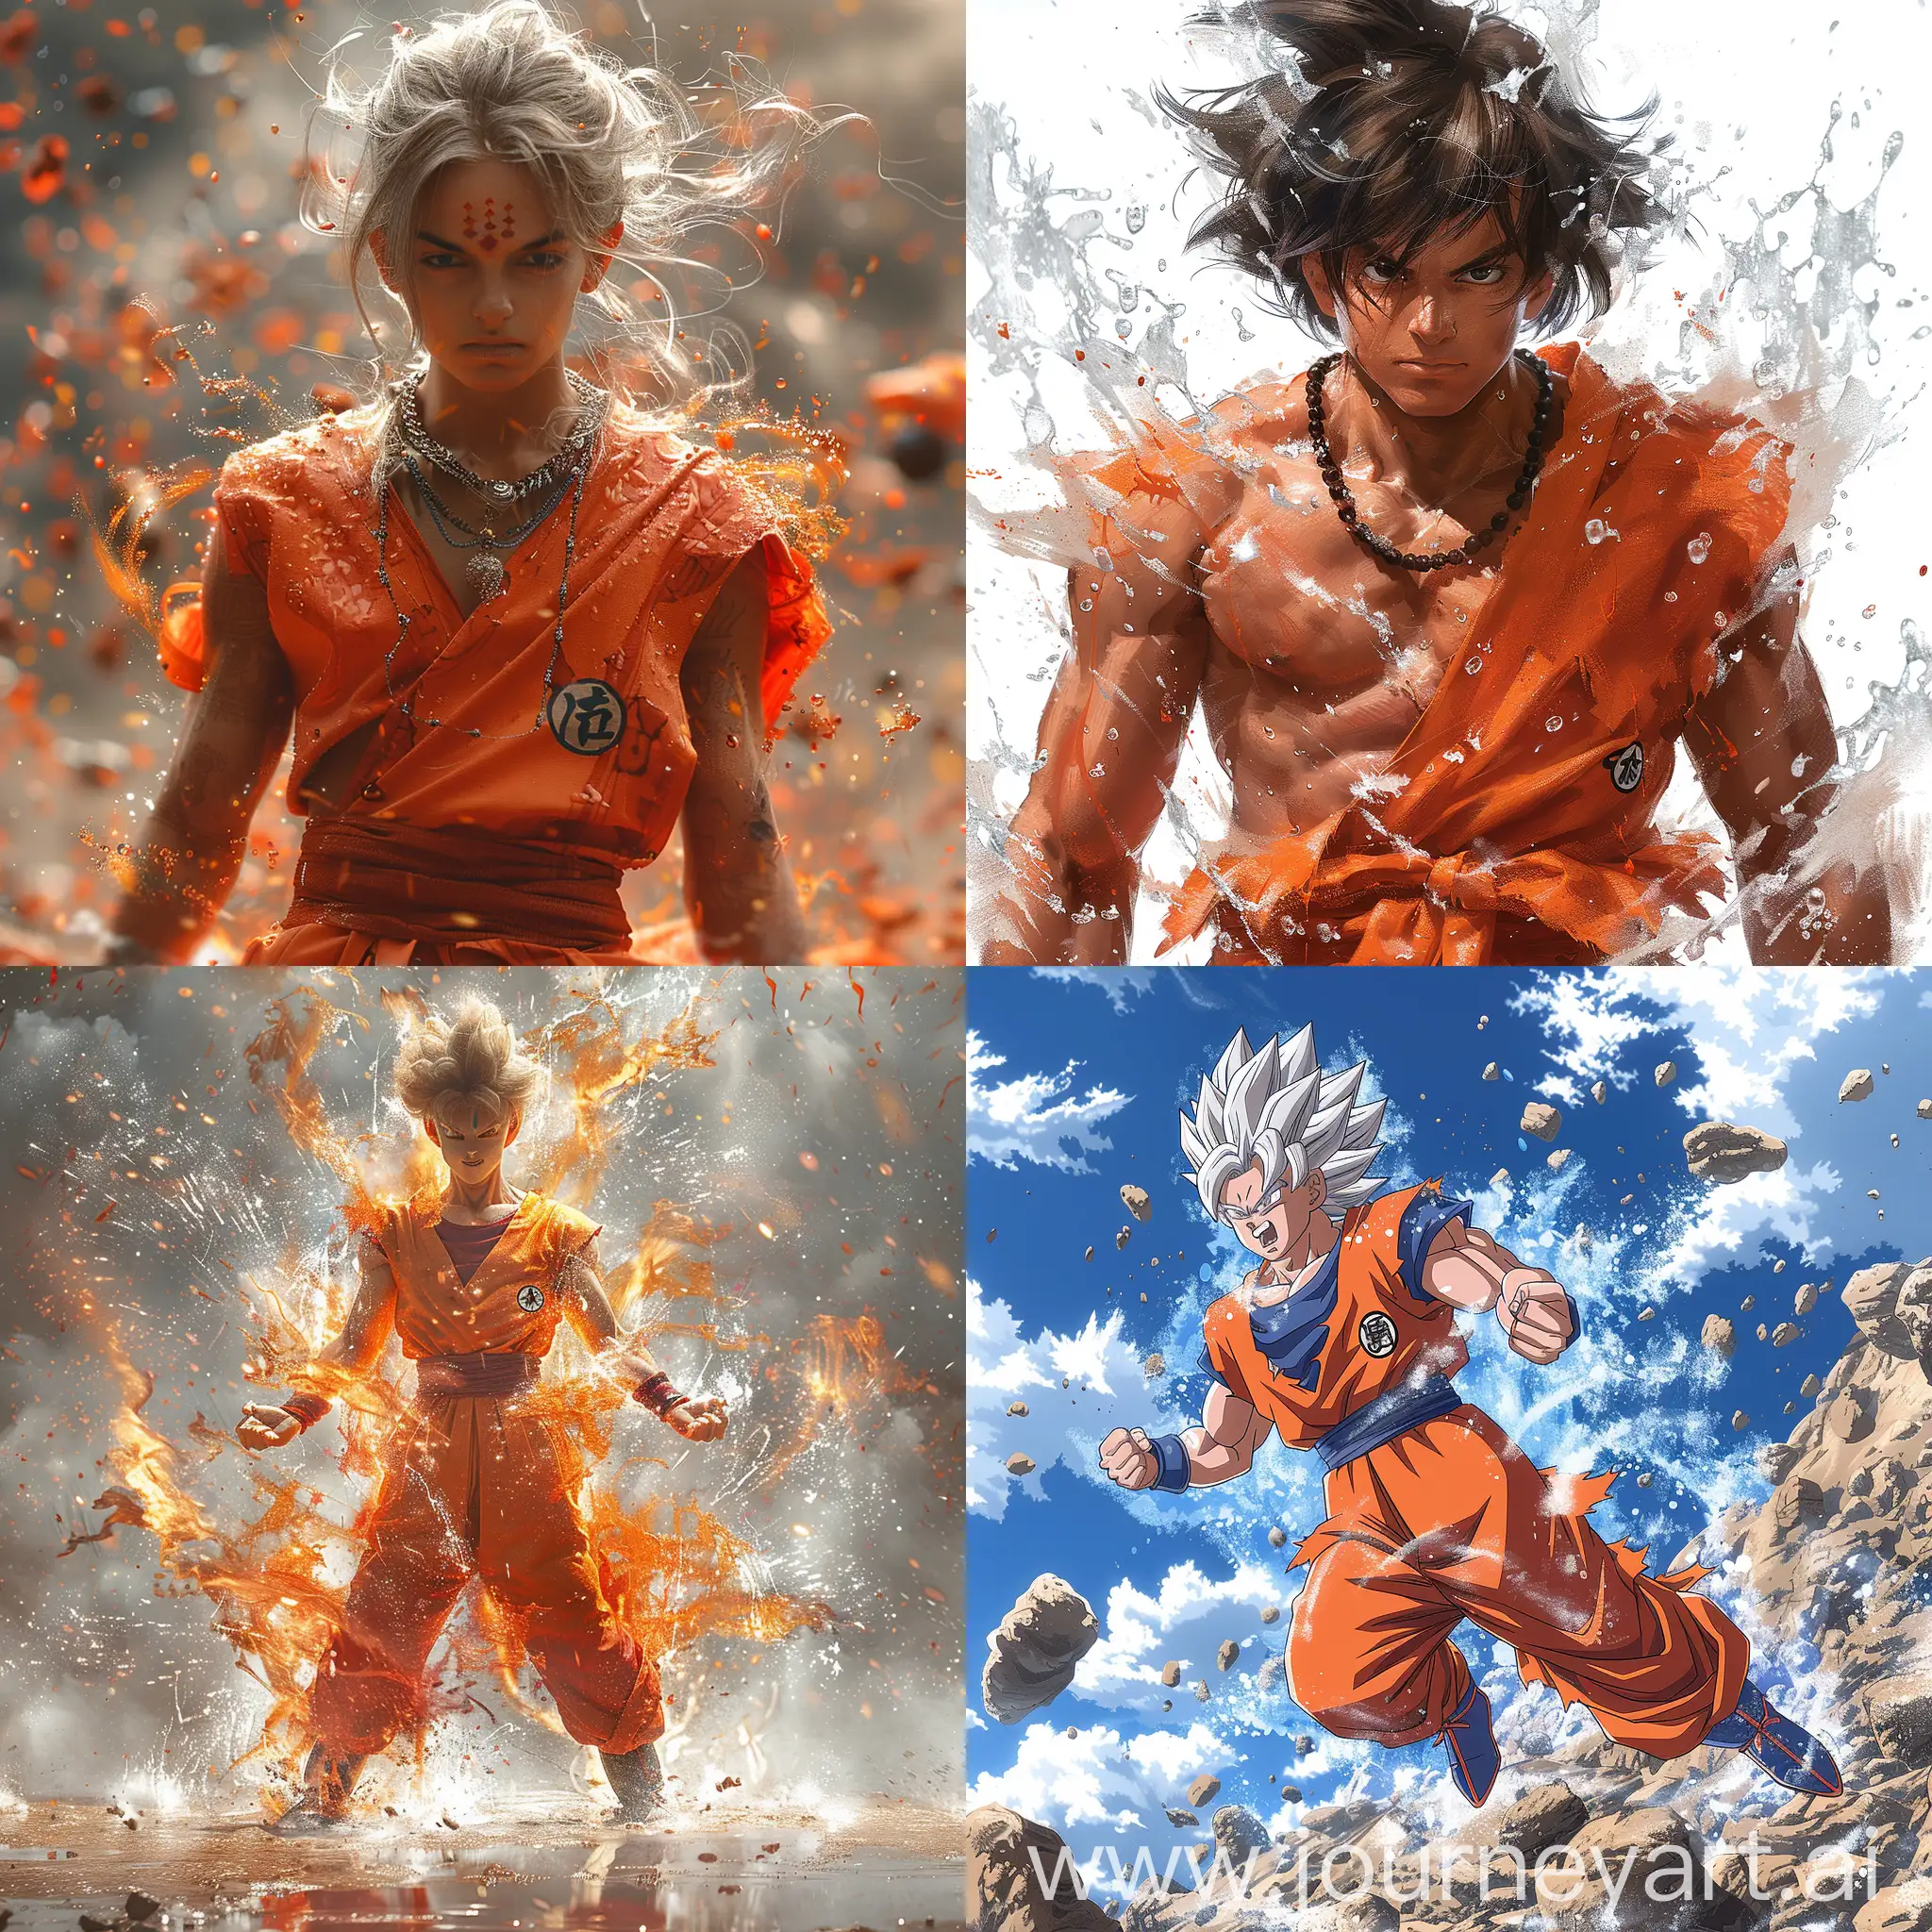 Indian-Ultra-Instinct-Goku-in-Dynamic-Power-Stance-with-Ethereal-Aura